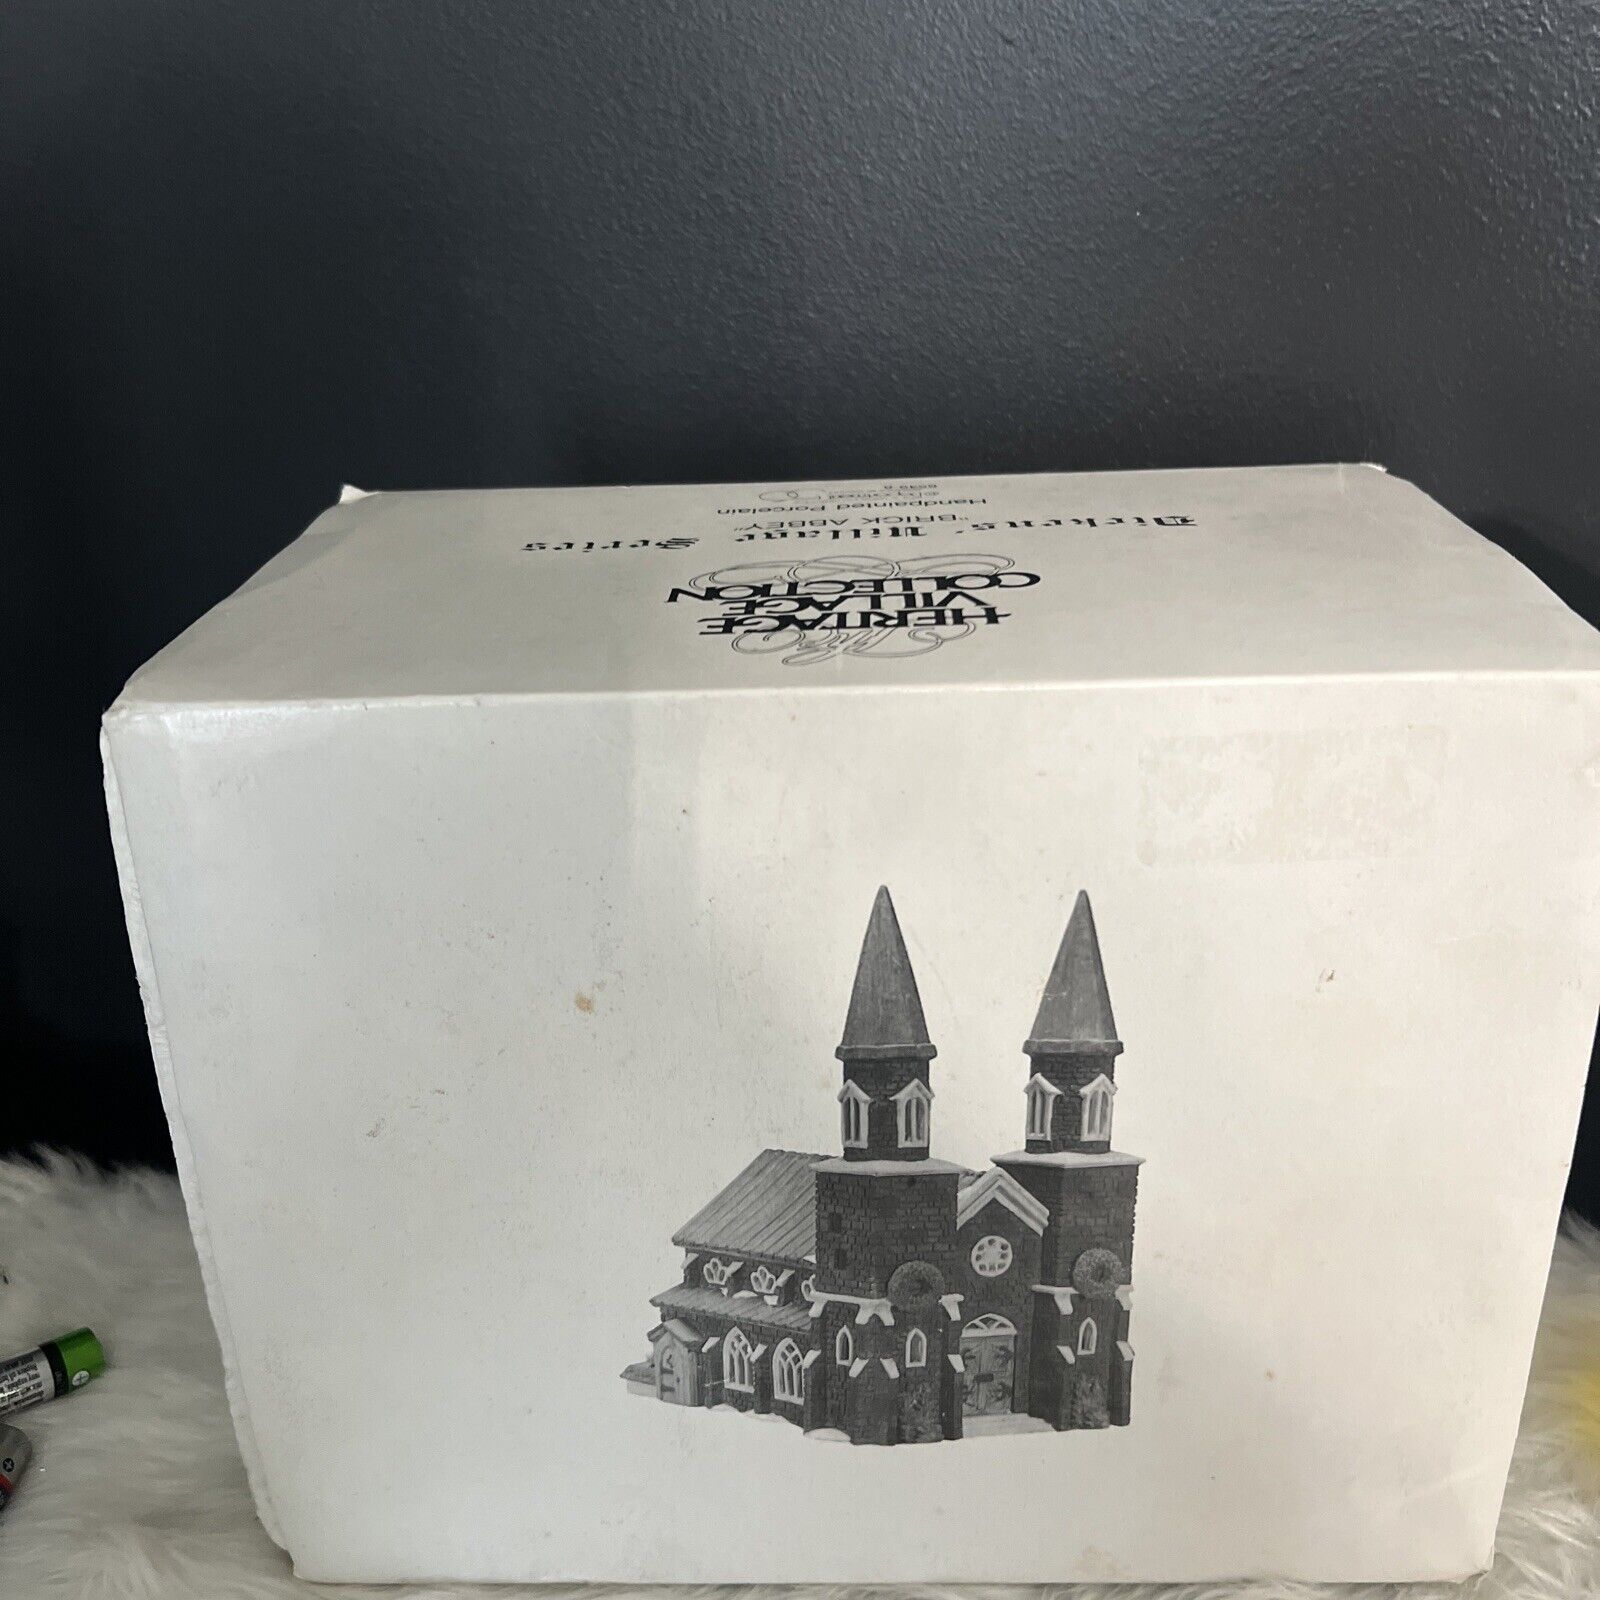 VTG Dept 56 Heritage Dickens Village Brick Abbey #6549-8 1987 RETIRED With Box